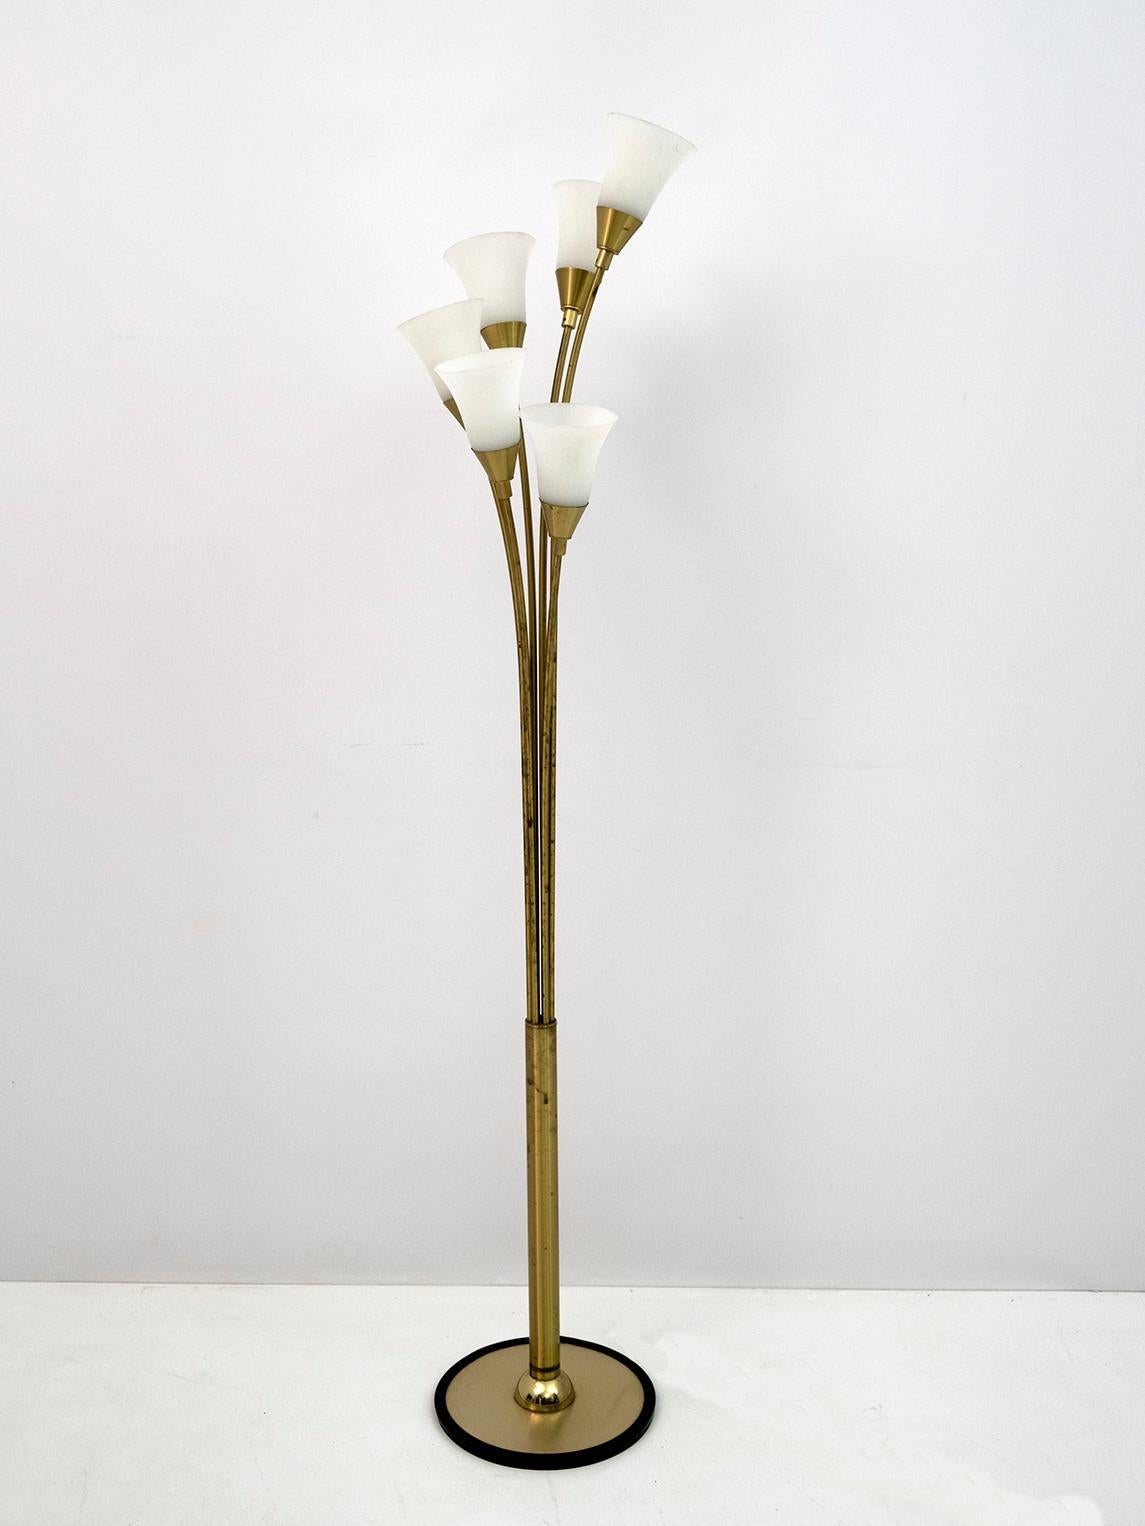 Tulip floor lamp, gilded brass, composed of six stems that support opal glass cups. Working electrical system, available with adapters for American bulbs. 
Italian production of the 1960s.